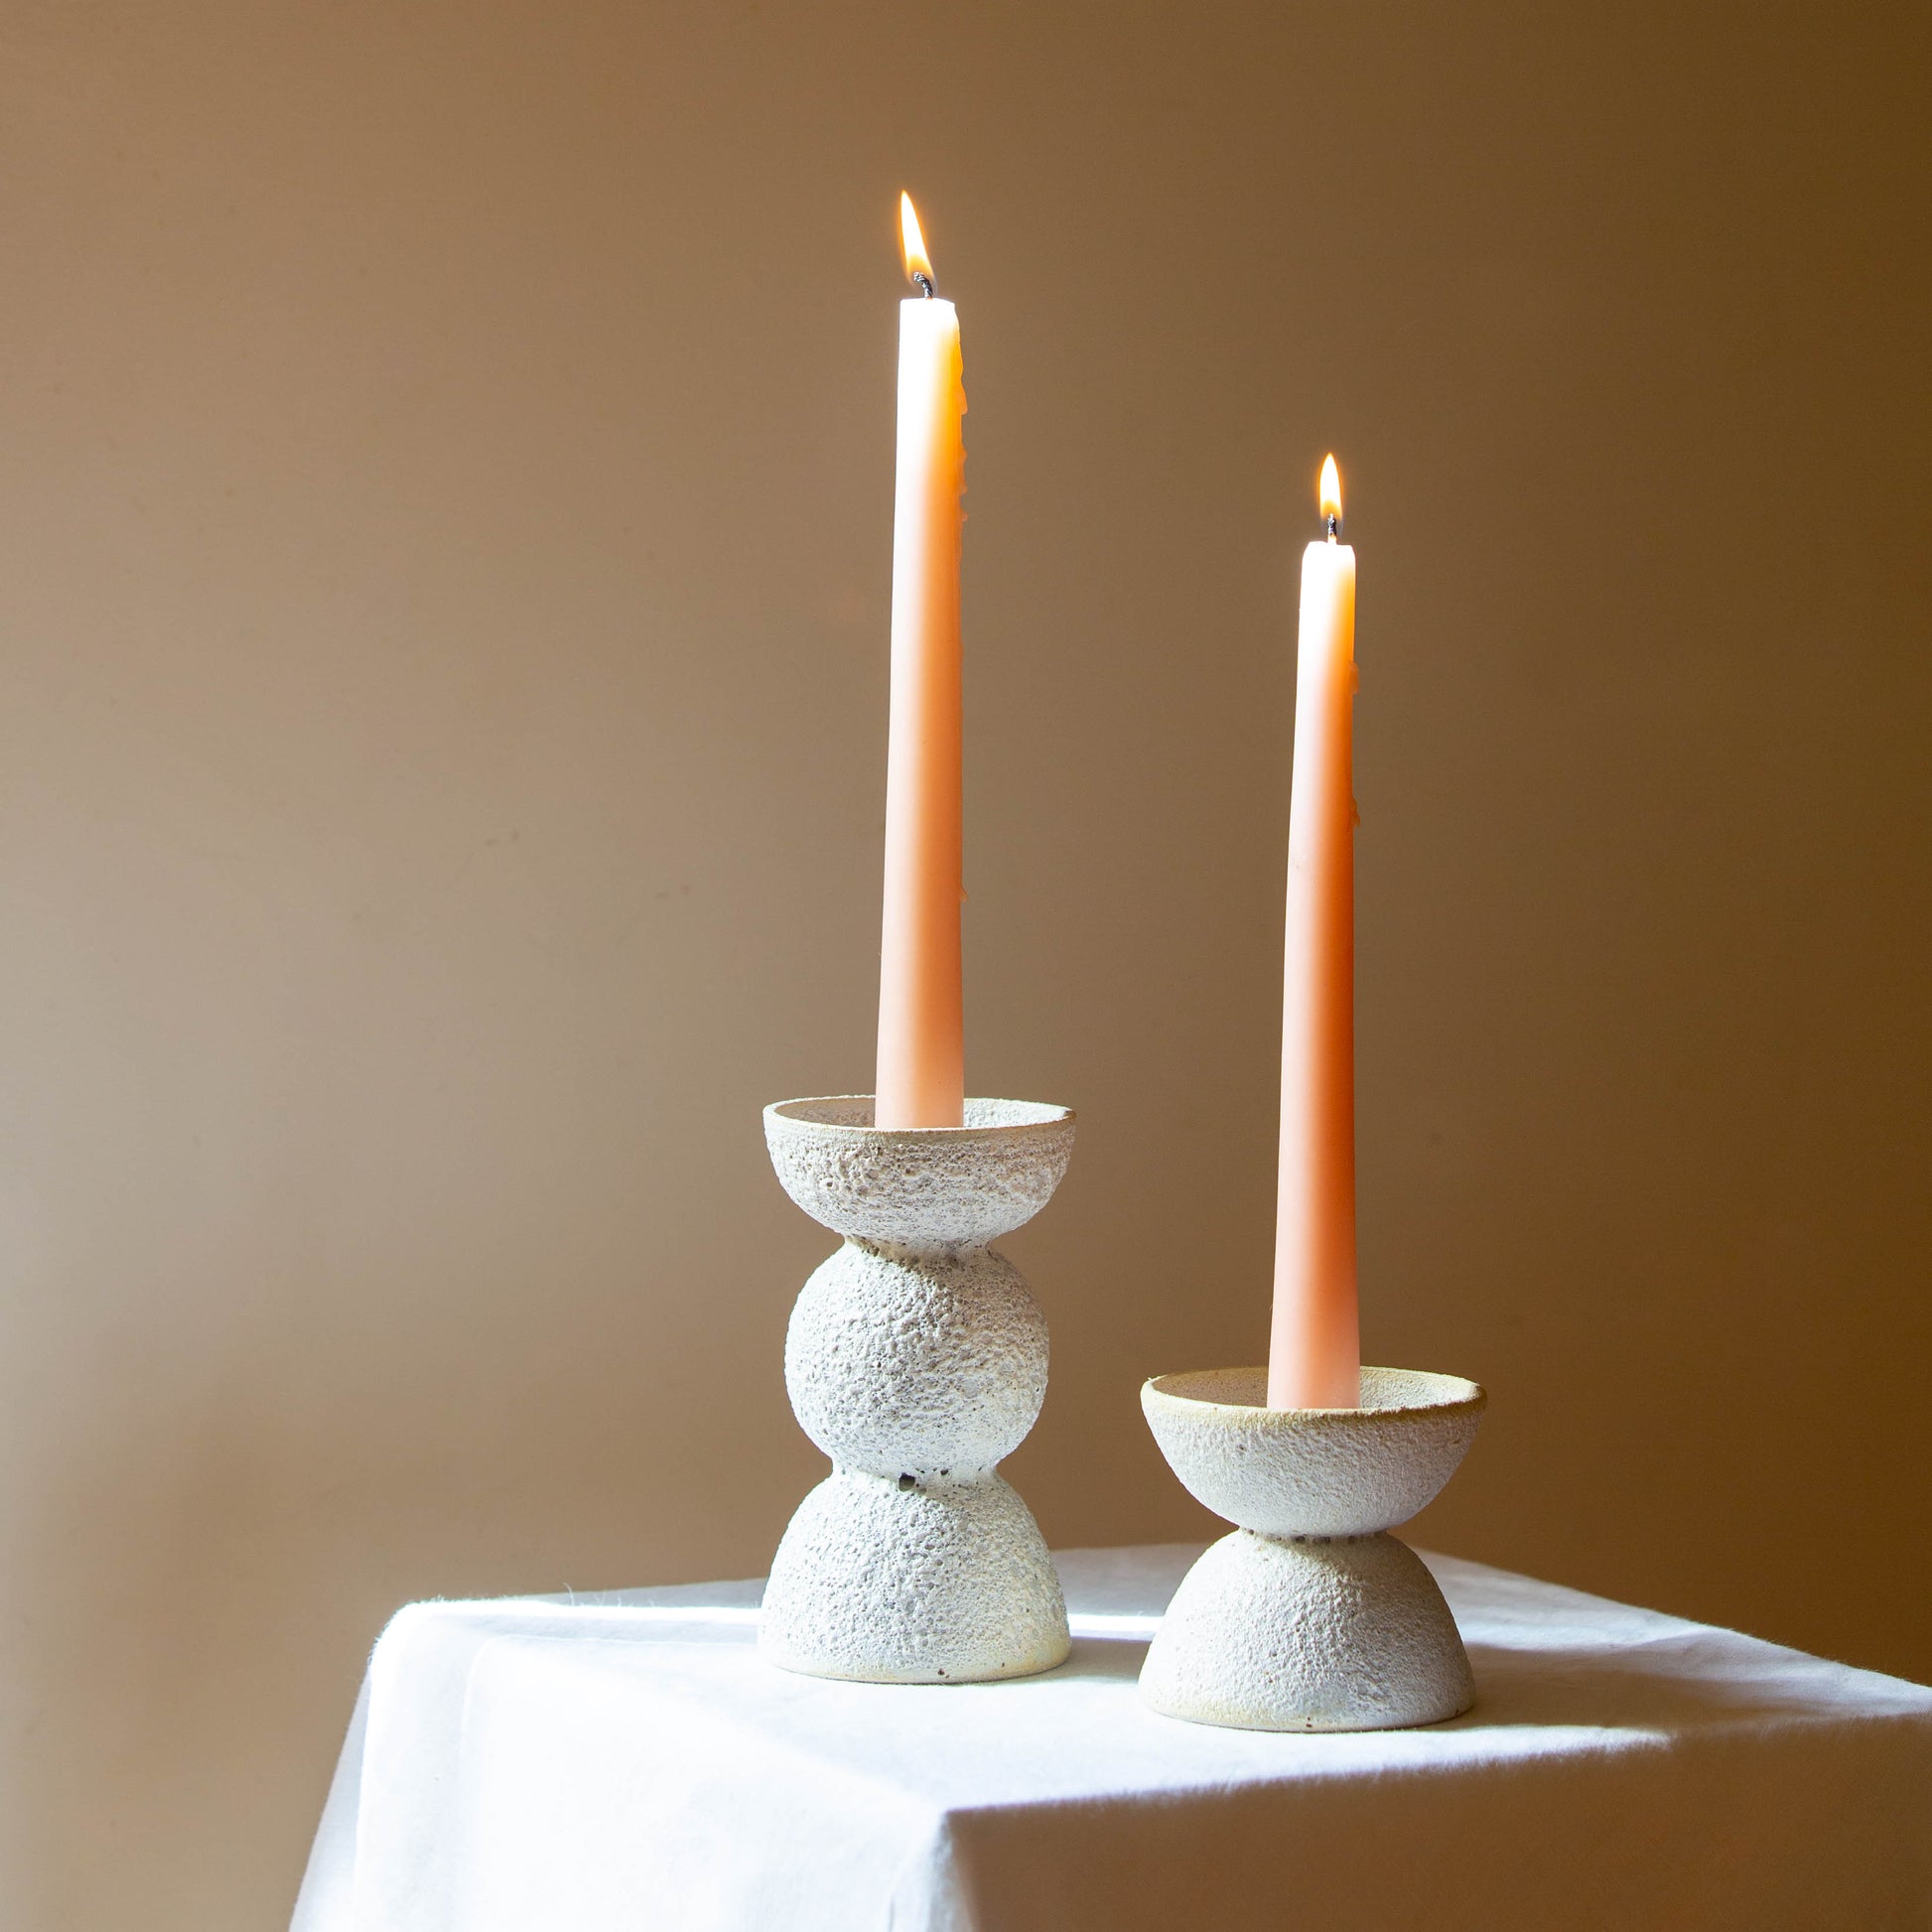 A tall and short candle holder hold lit candles. The candles are a peach colour by 'this is someday'